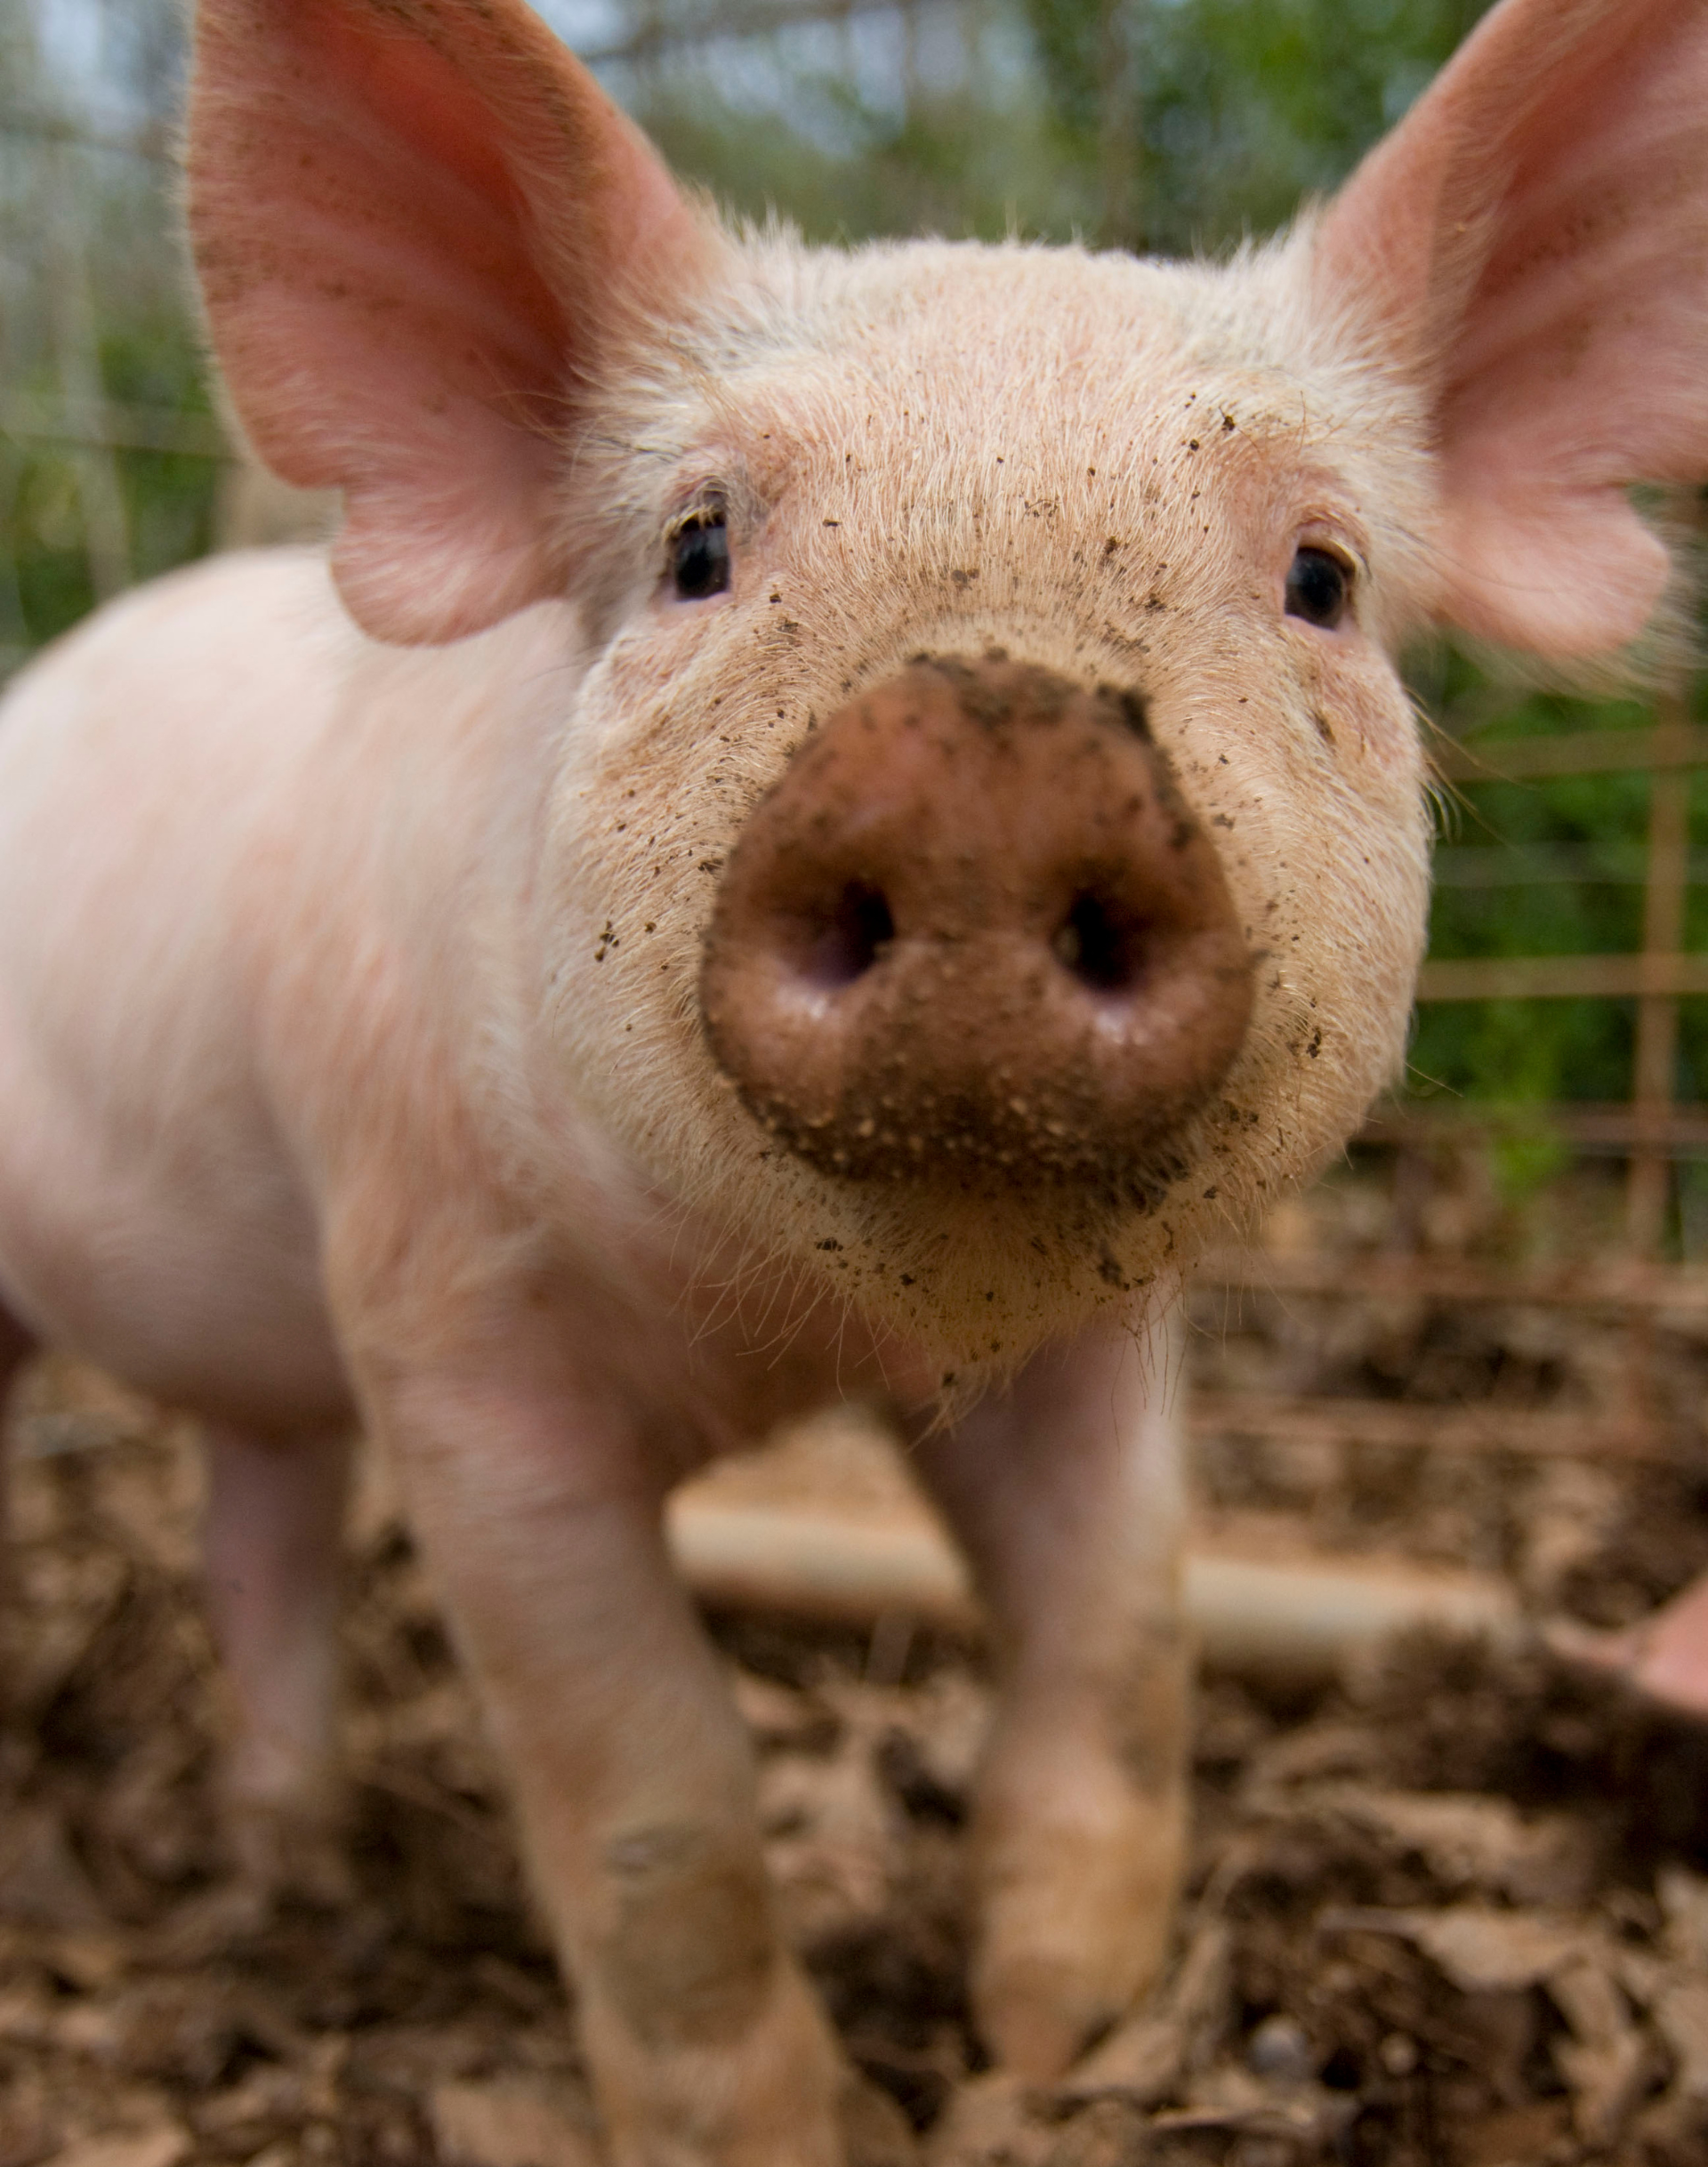 close up of a piglet looking at the camera